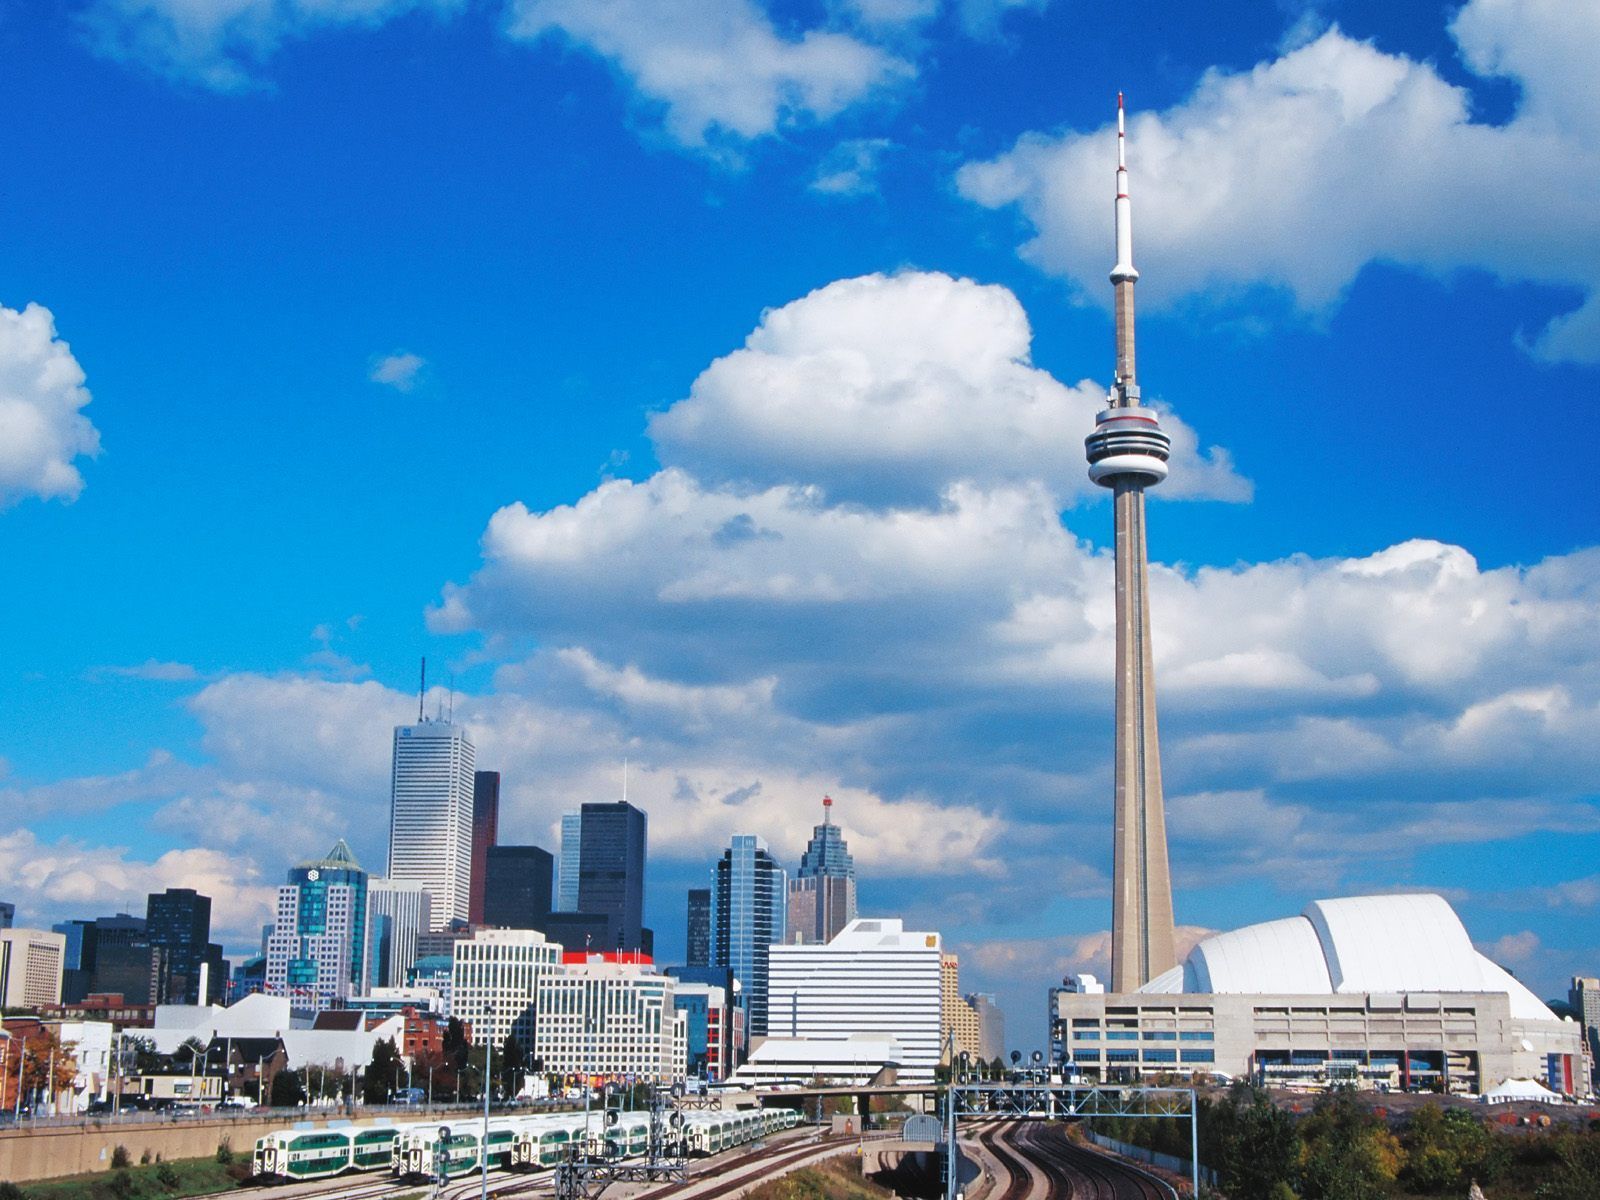 Toronto, Ontario, Canada. Best places to travel, Cn tower, Canadian national railway